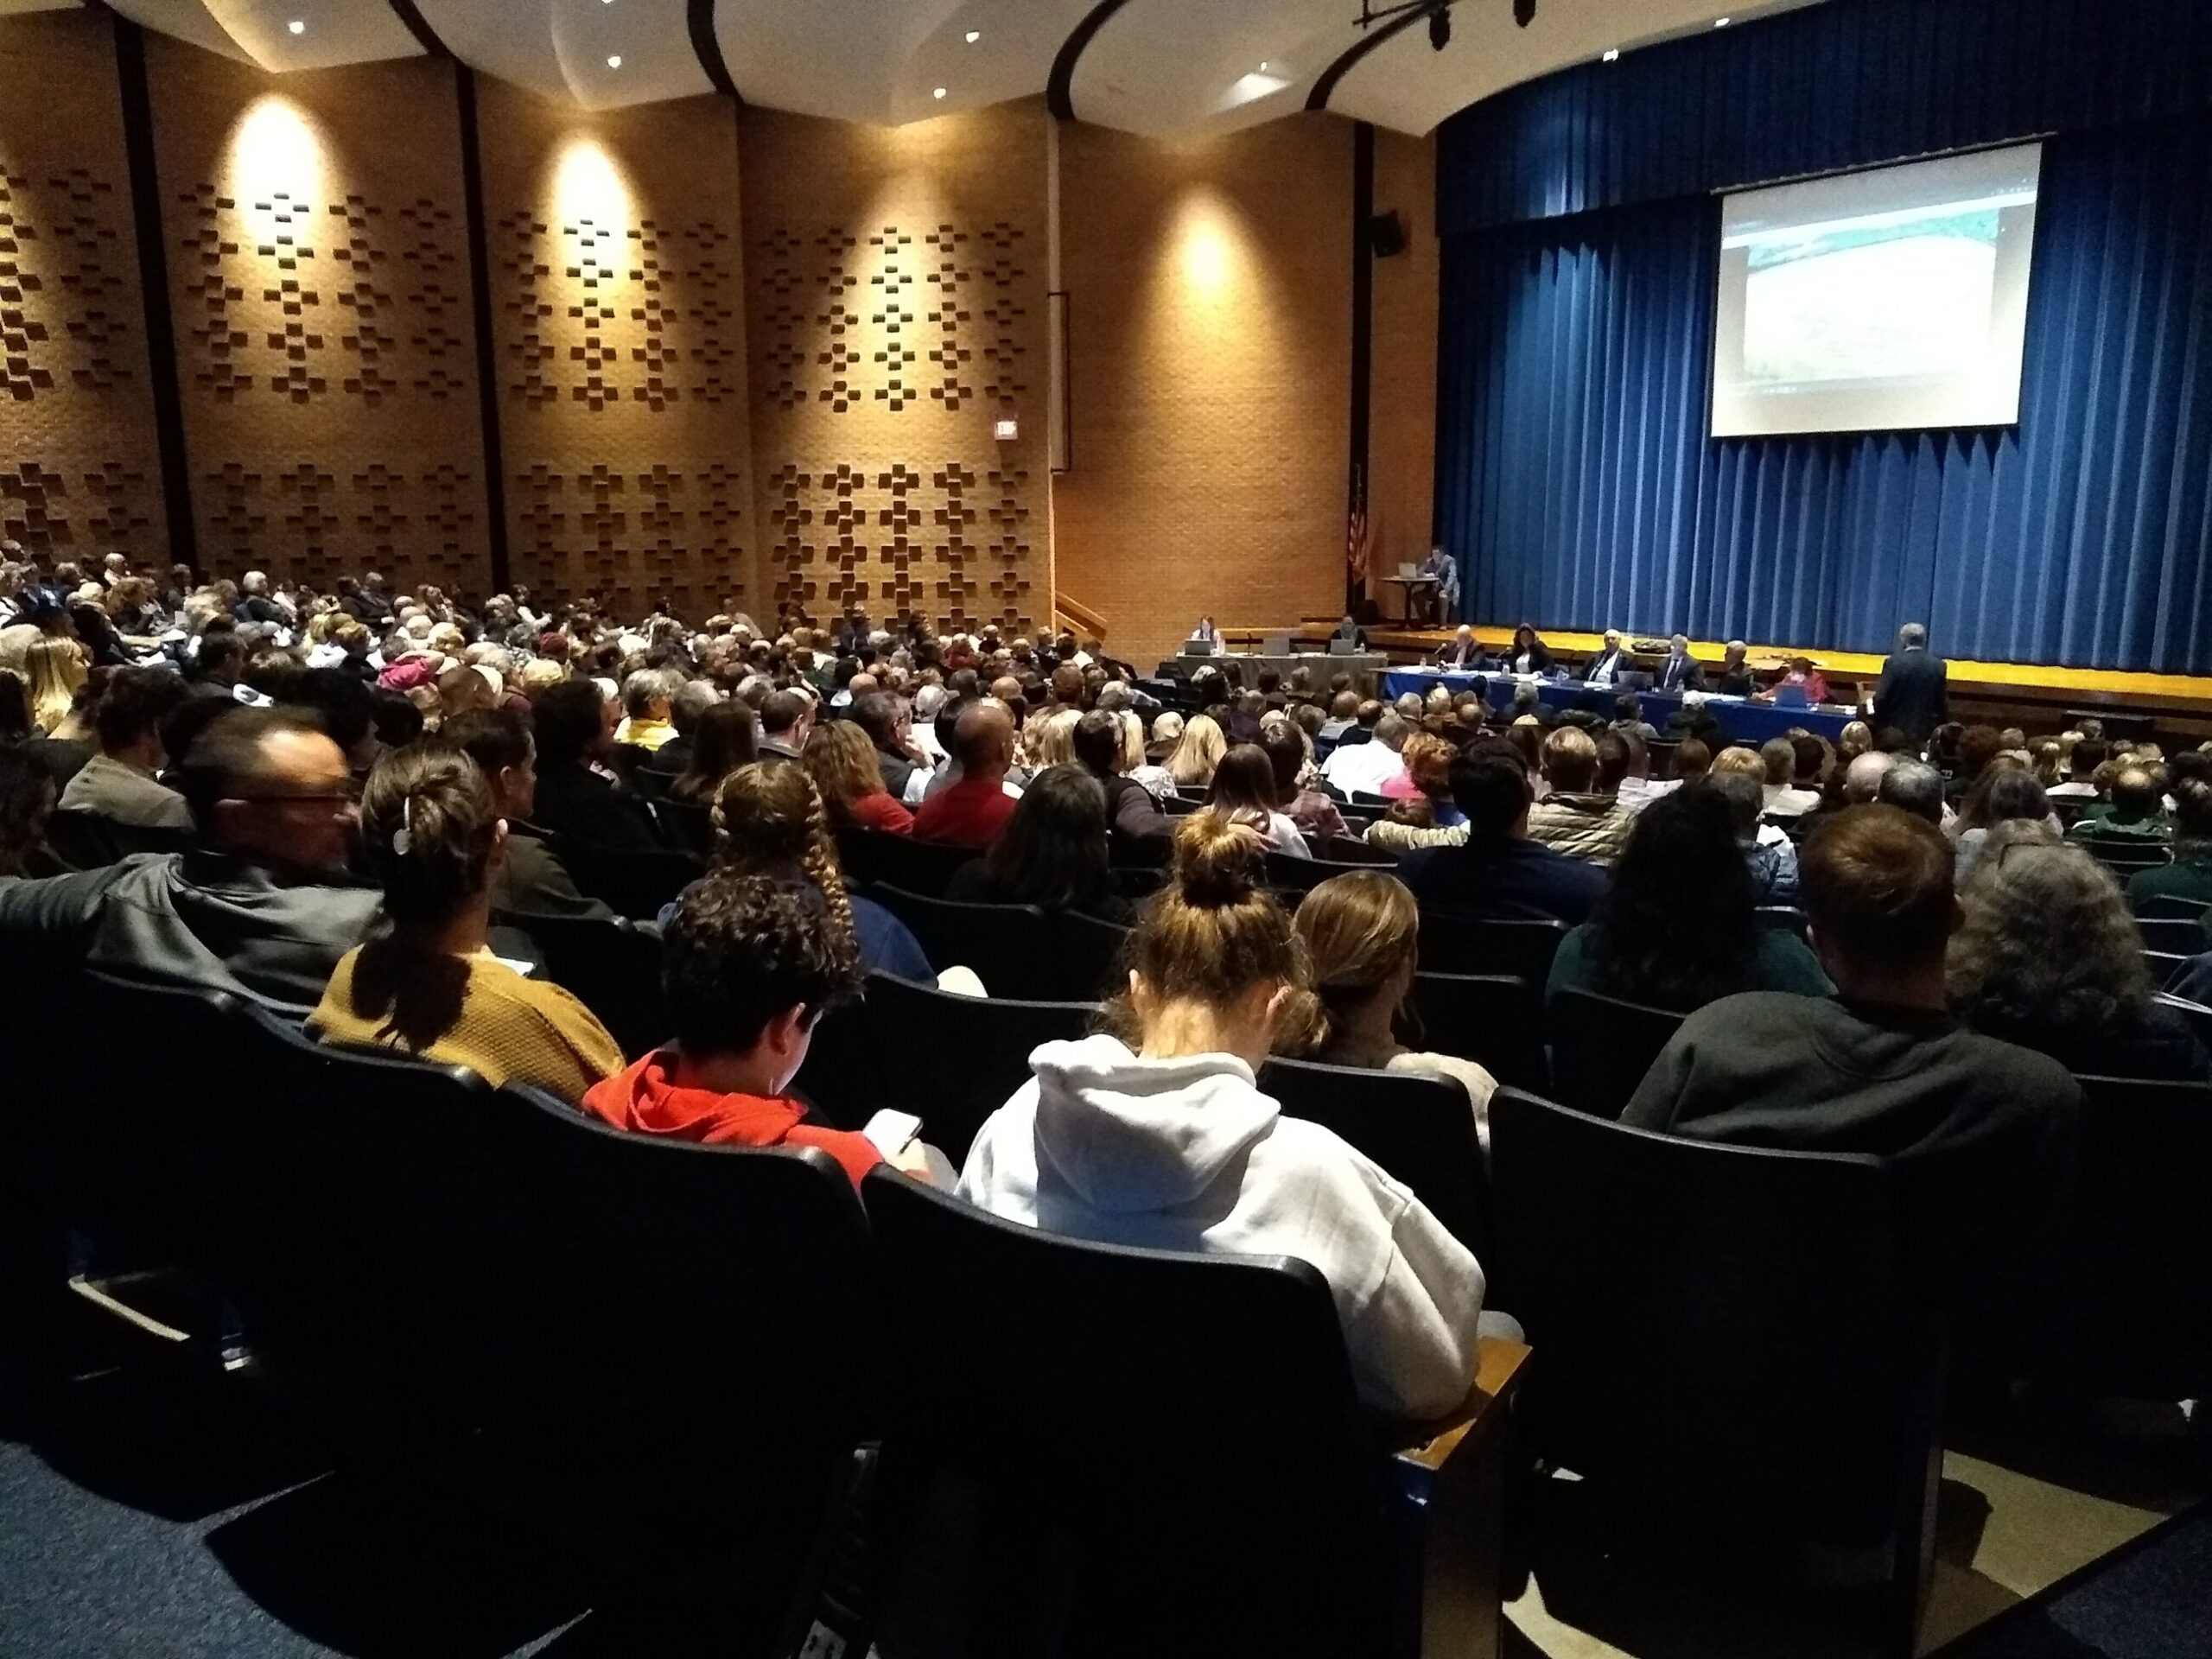 A wide shot of an auditorium filled with seated people with a governing body in front and a screen presentation against a closed blue curtain.